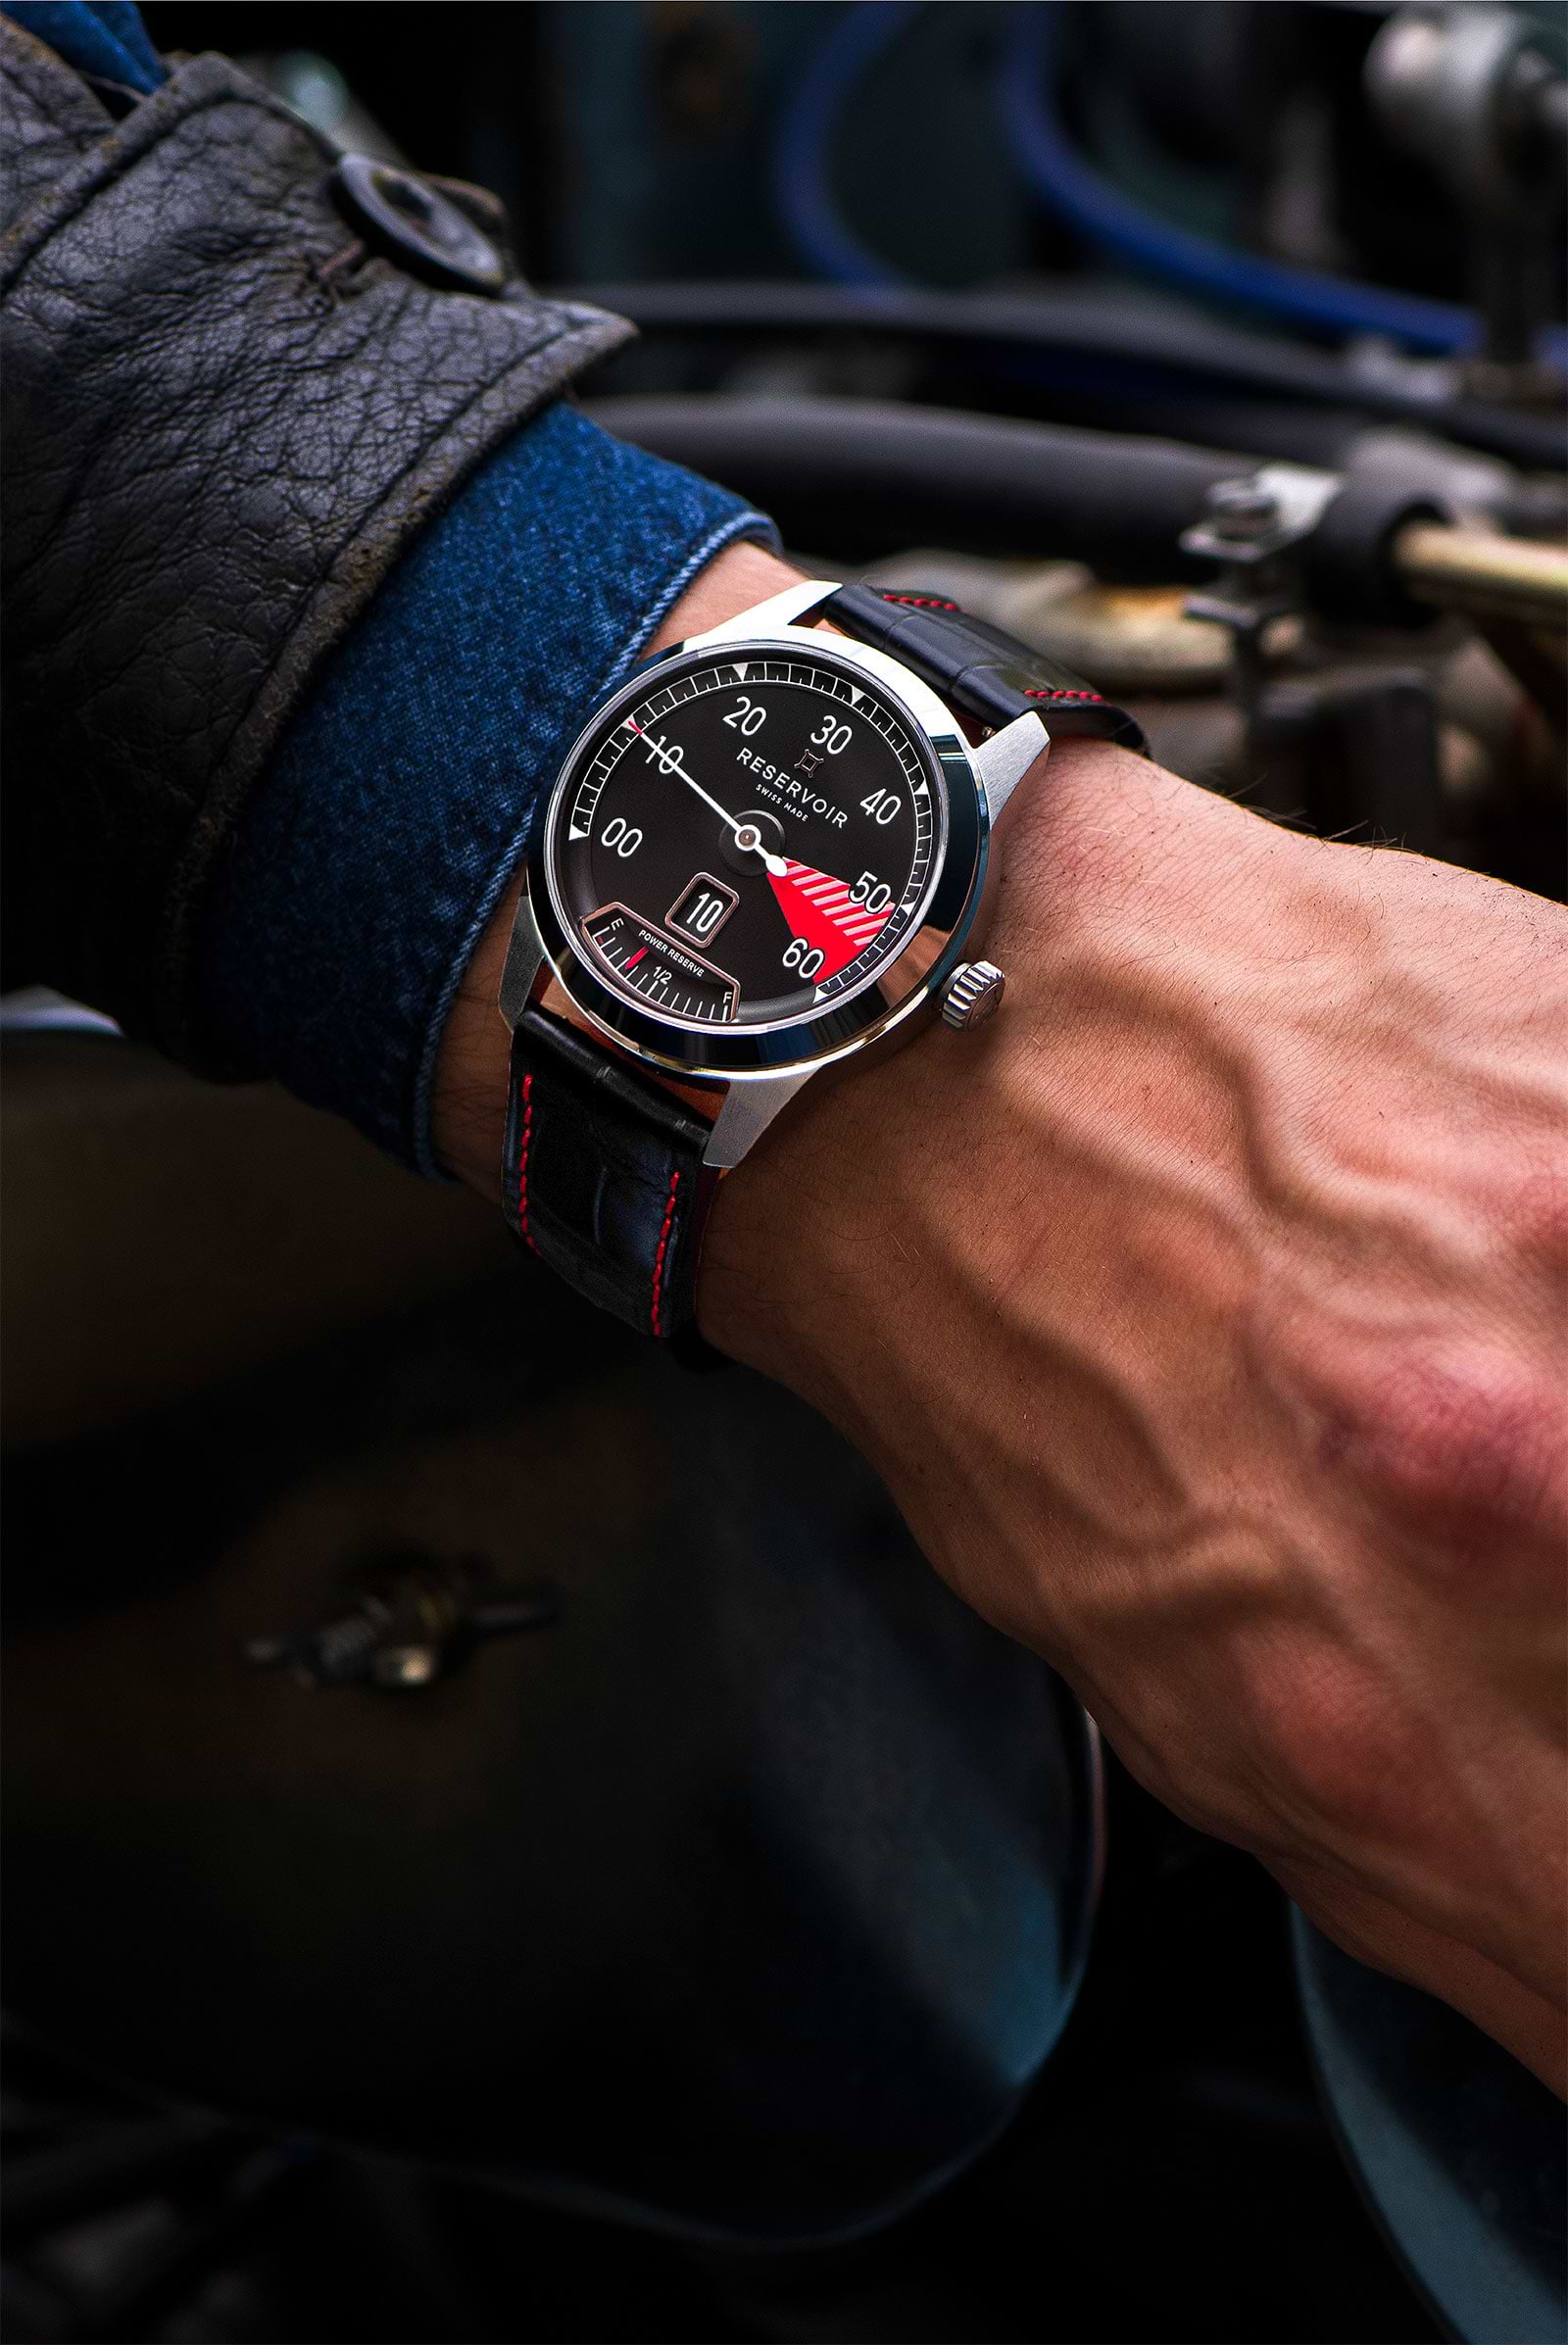 Vintage Car RPM Counter Watch in Luxury of Black, Dusty Rose, and Light Steel Blue.